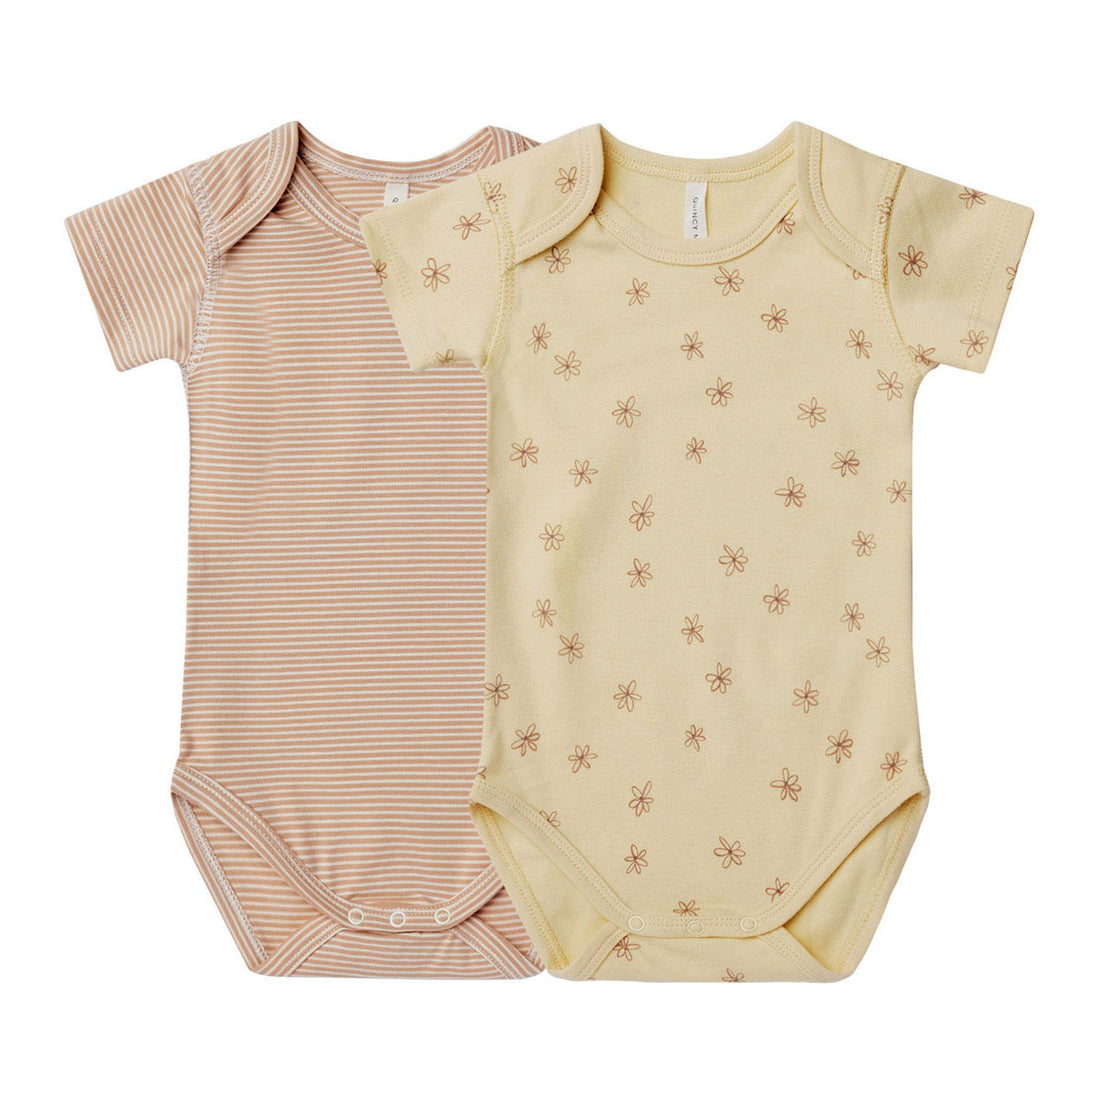 Quincy Mae Blossom, Apricot Stripe Short Sleeve Bodysuit, 2 Pack – Ladida